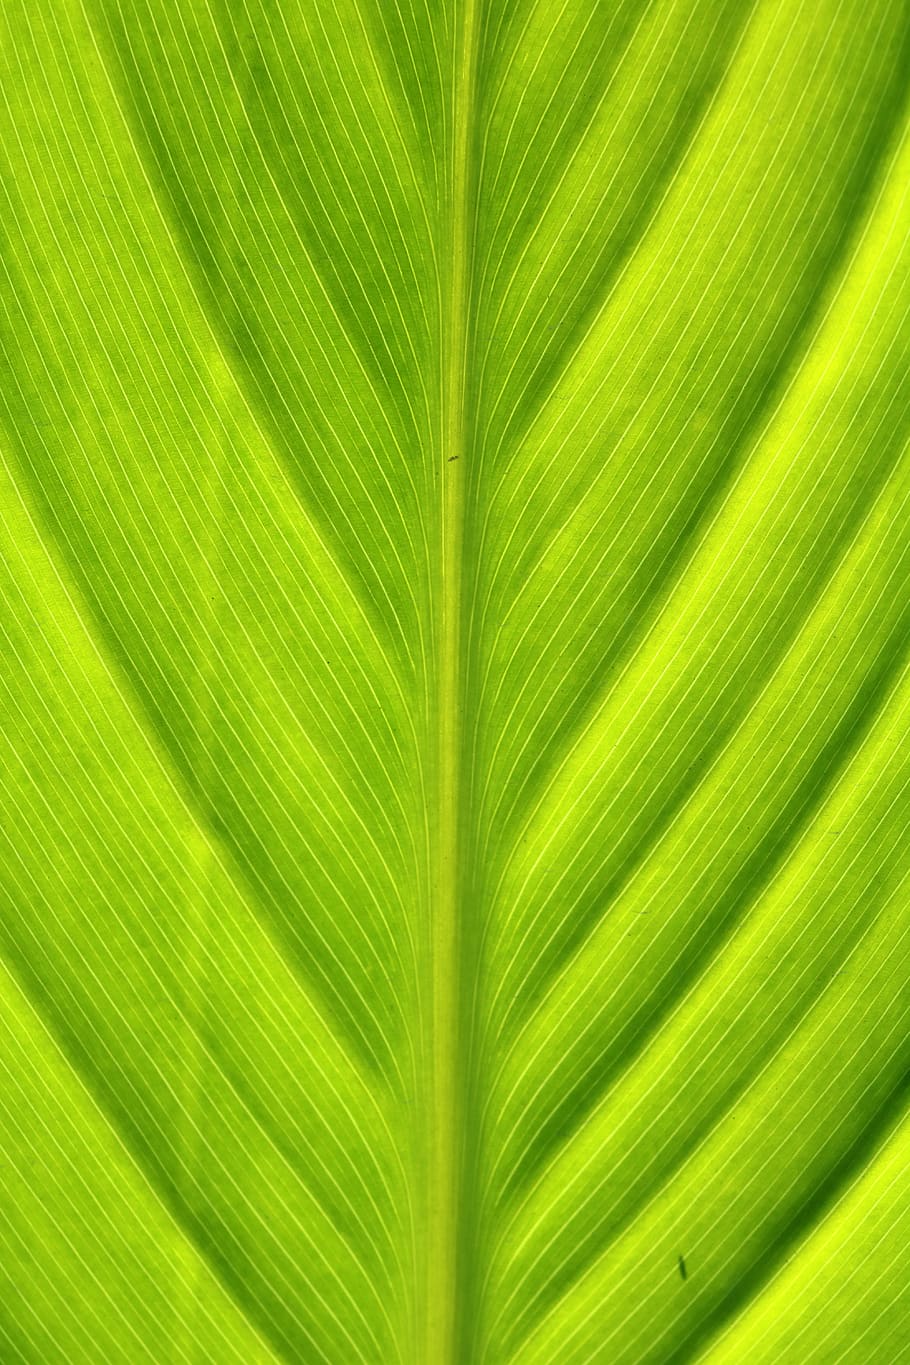 green, wood, nature, leaf, the leaves, chartreuse, pattern, fresh, khanna, background